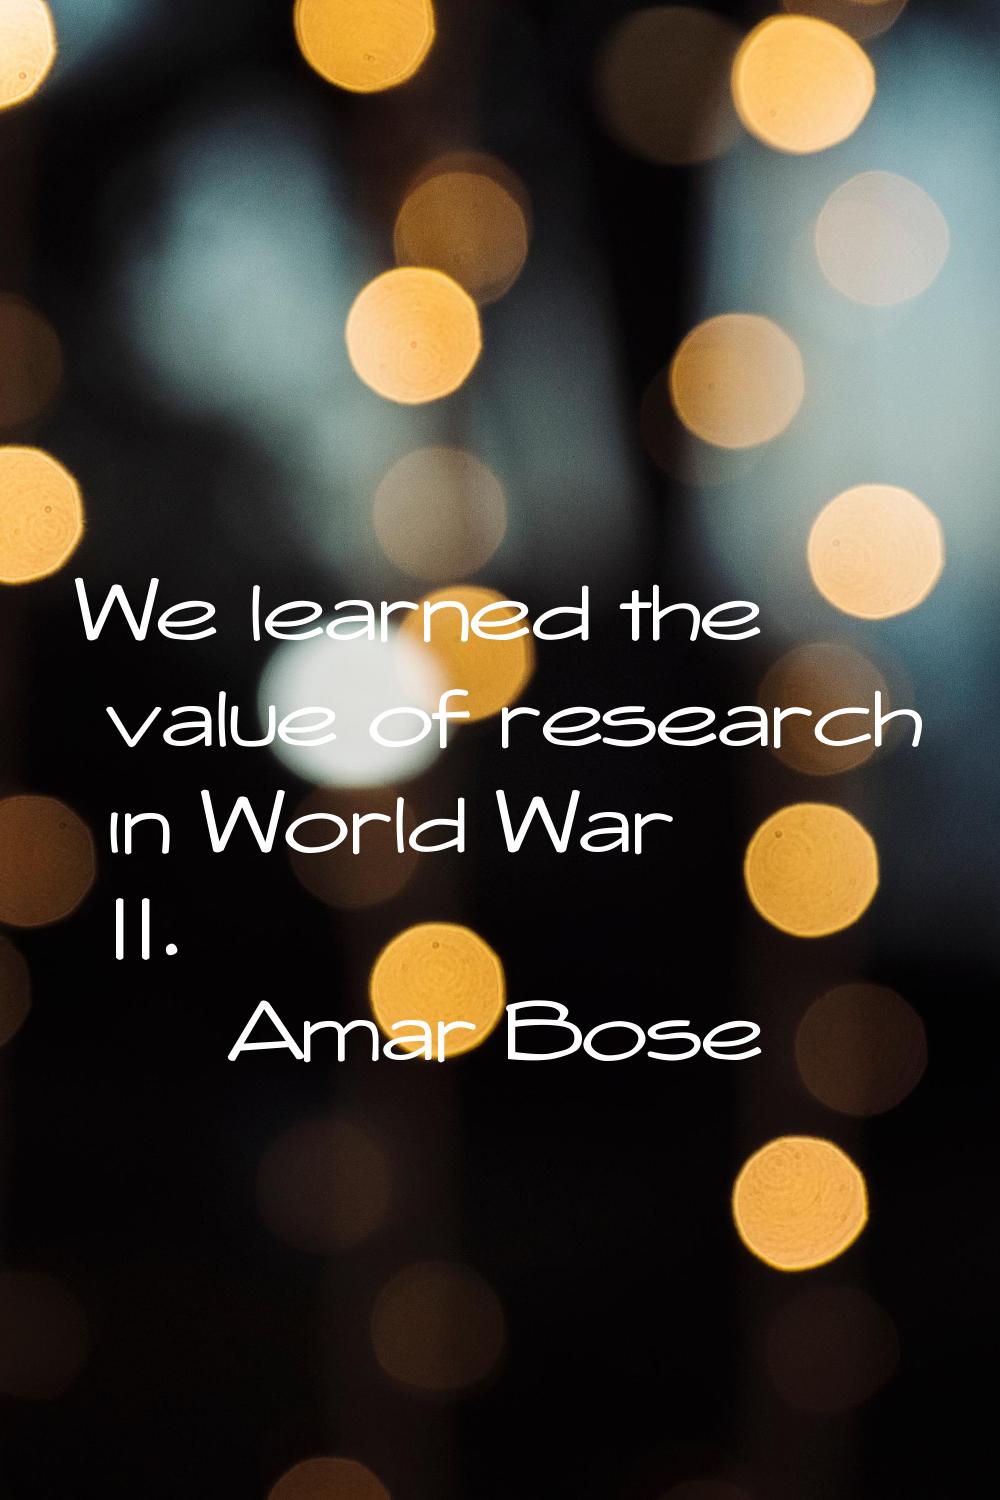 We learned the value of research in World War II.